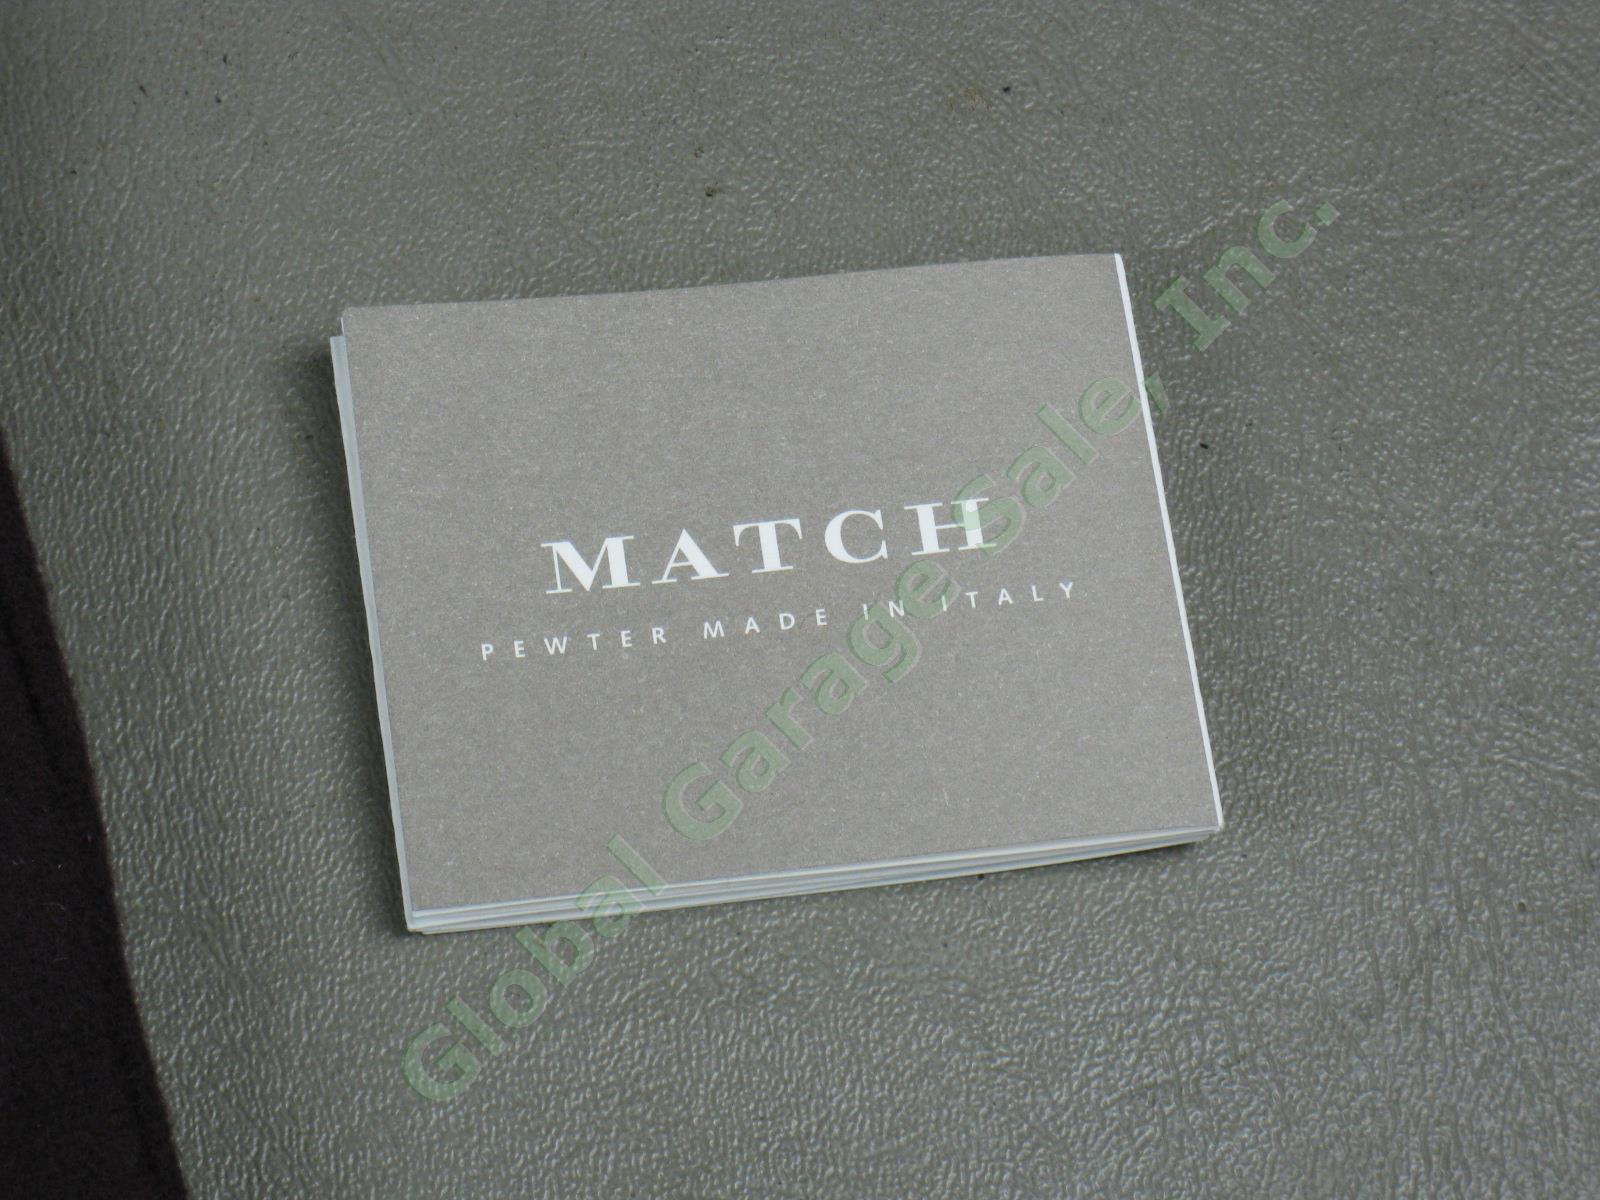 NEW Match Pewter Genoa Candlestick 9.75" Made In Italy $220 Retail No Reserve! 8